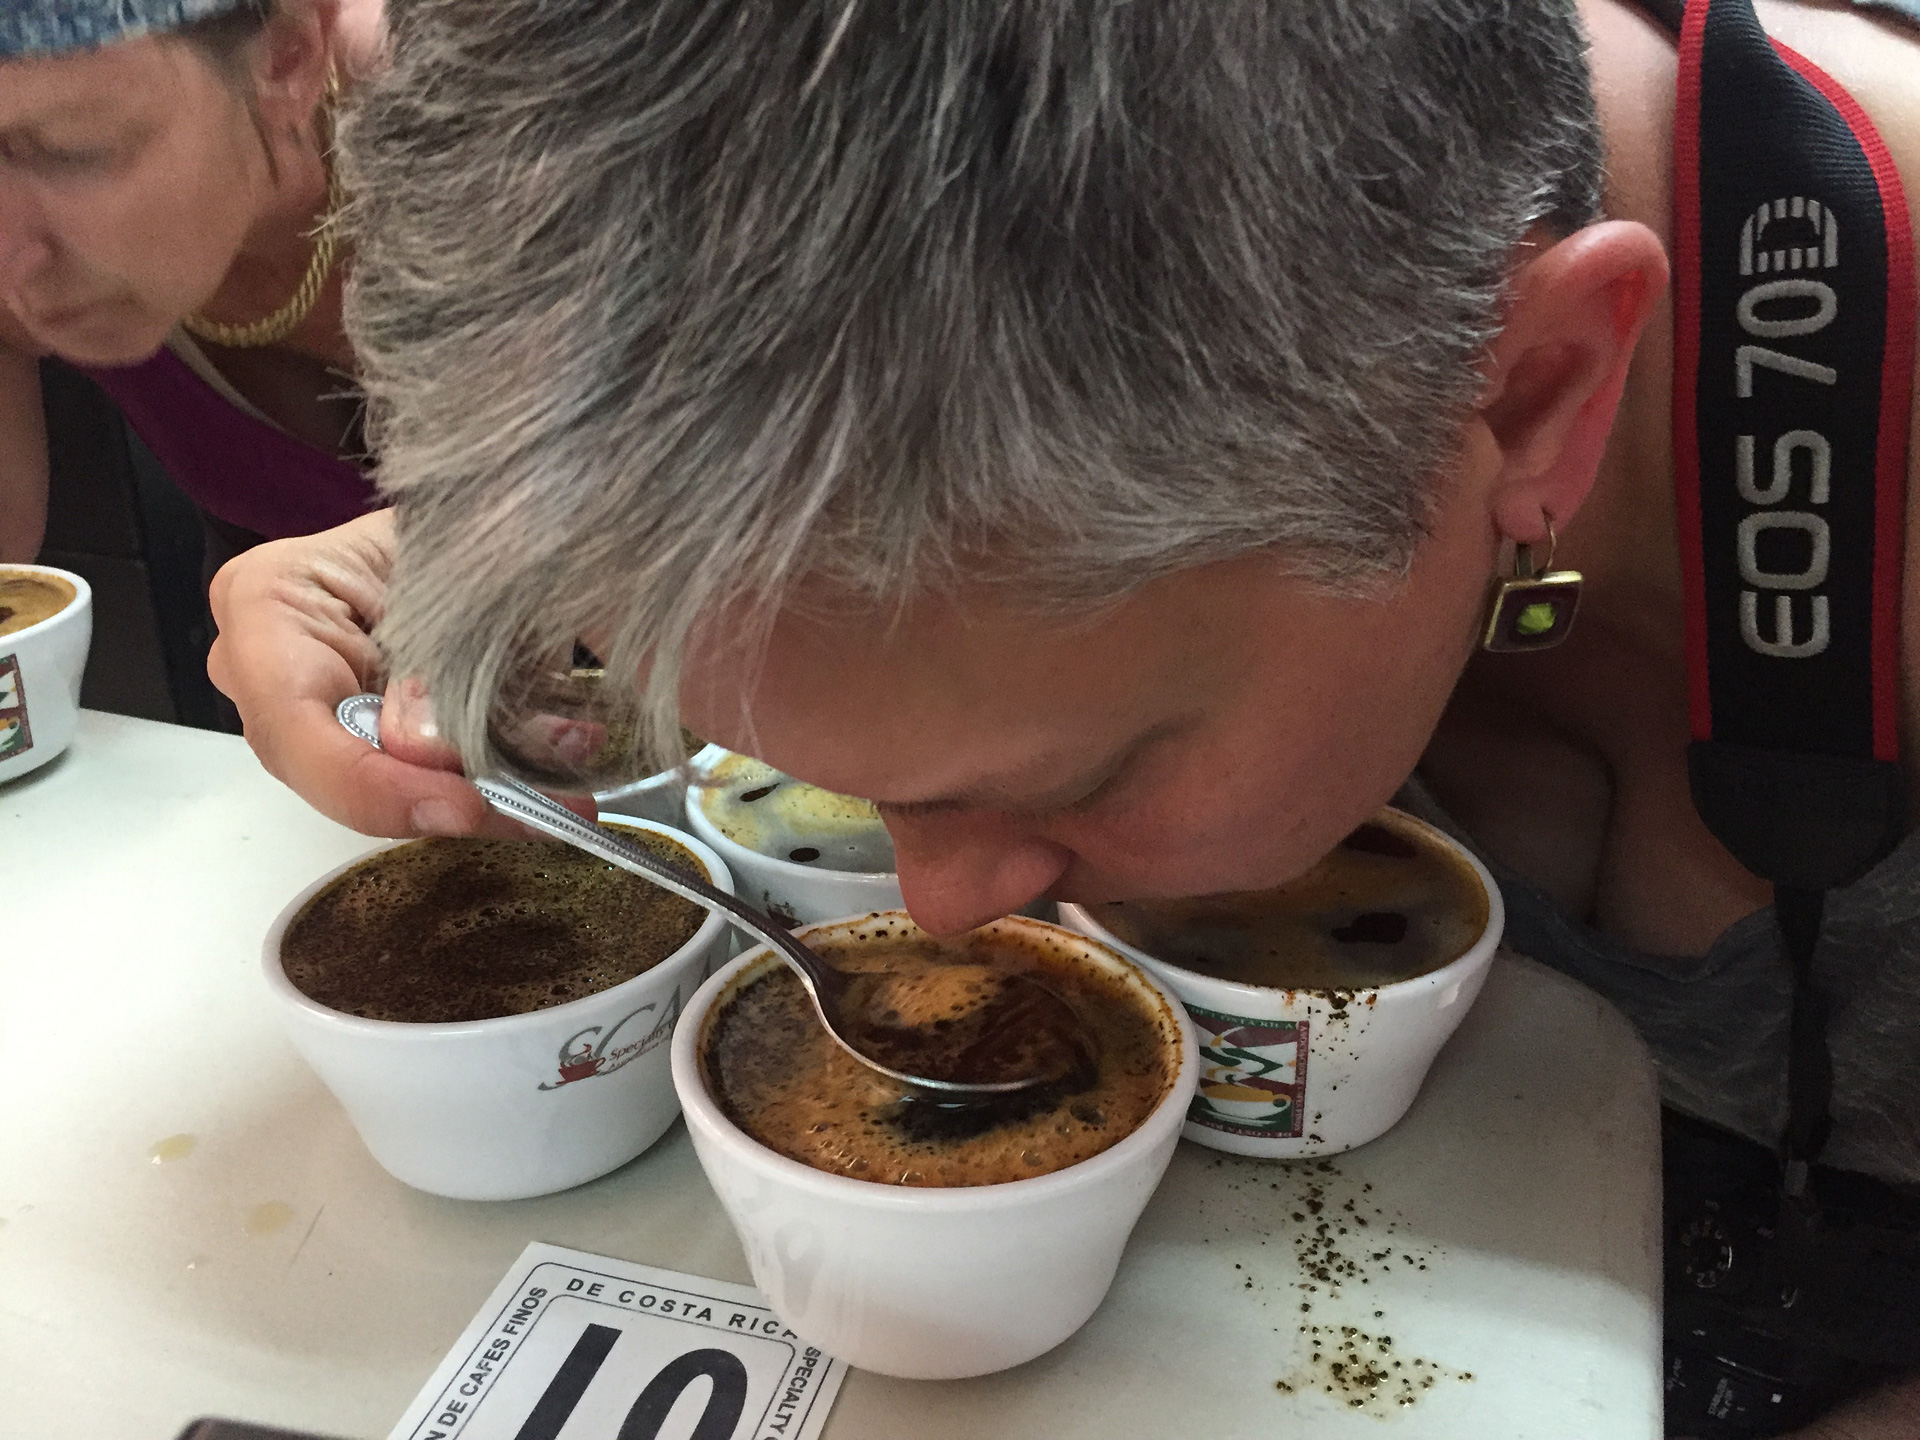 The author, Kim Westerman, cupping coffee in Costa Rica